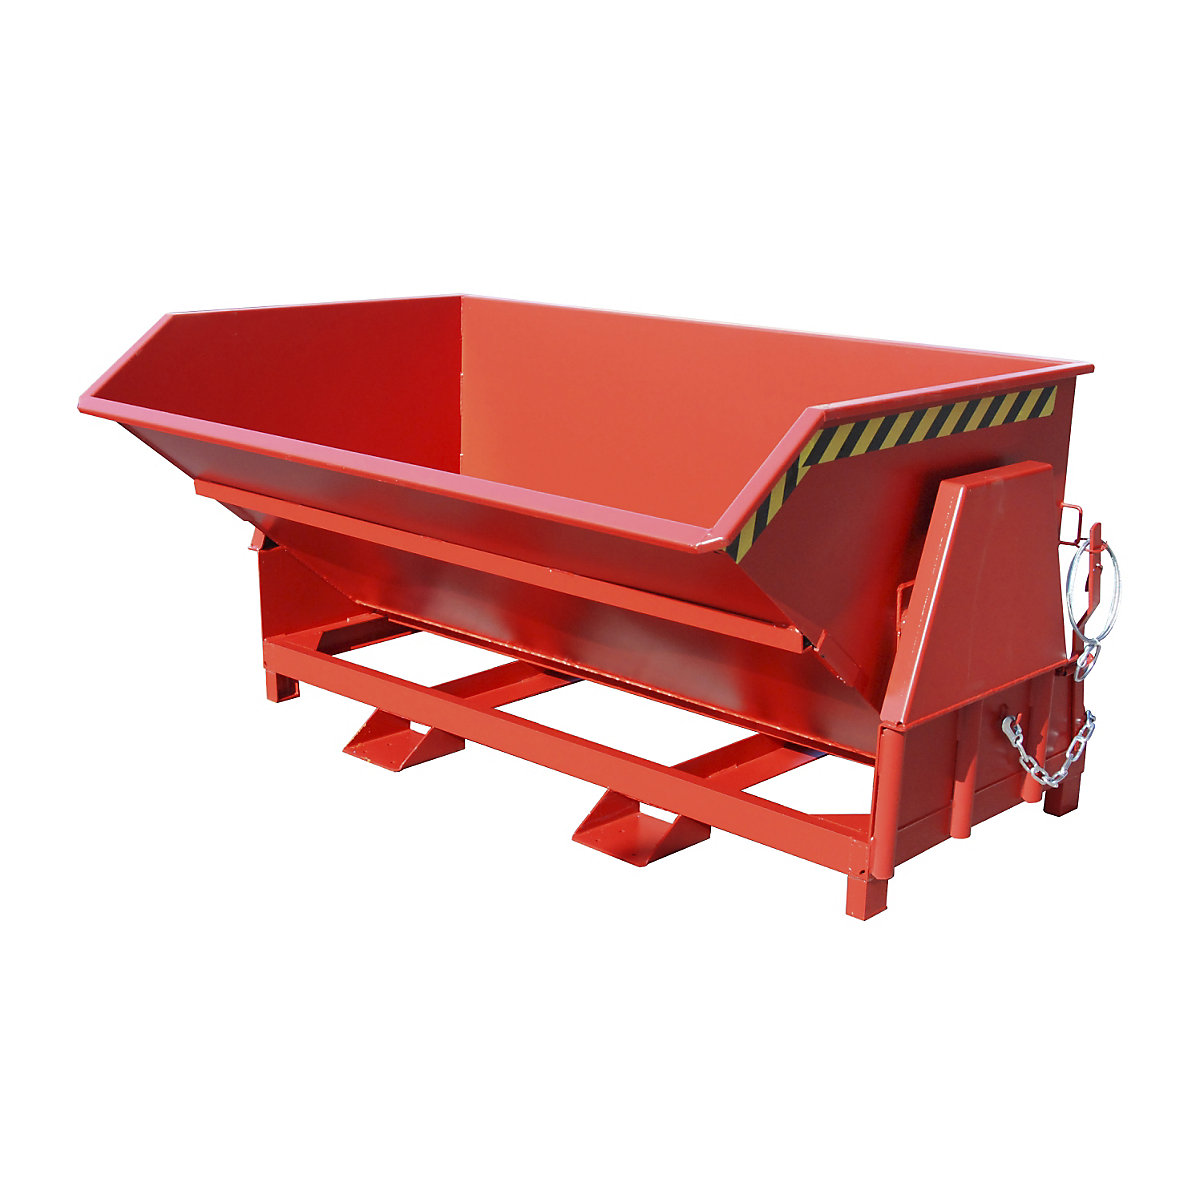 Tilting skip, standard overall height, without wheels – eurokraft pro, capacity 2.0 m³, painted red RAL 3000-9